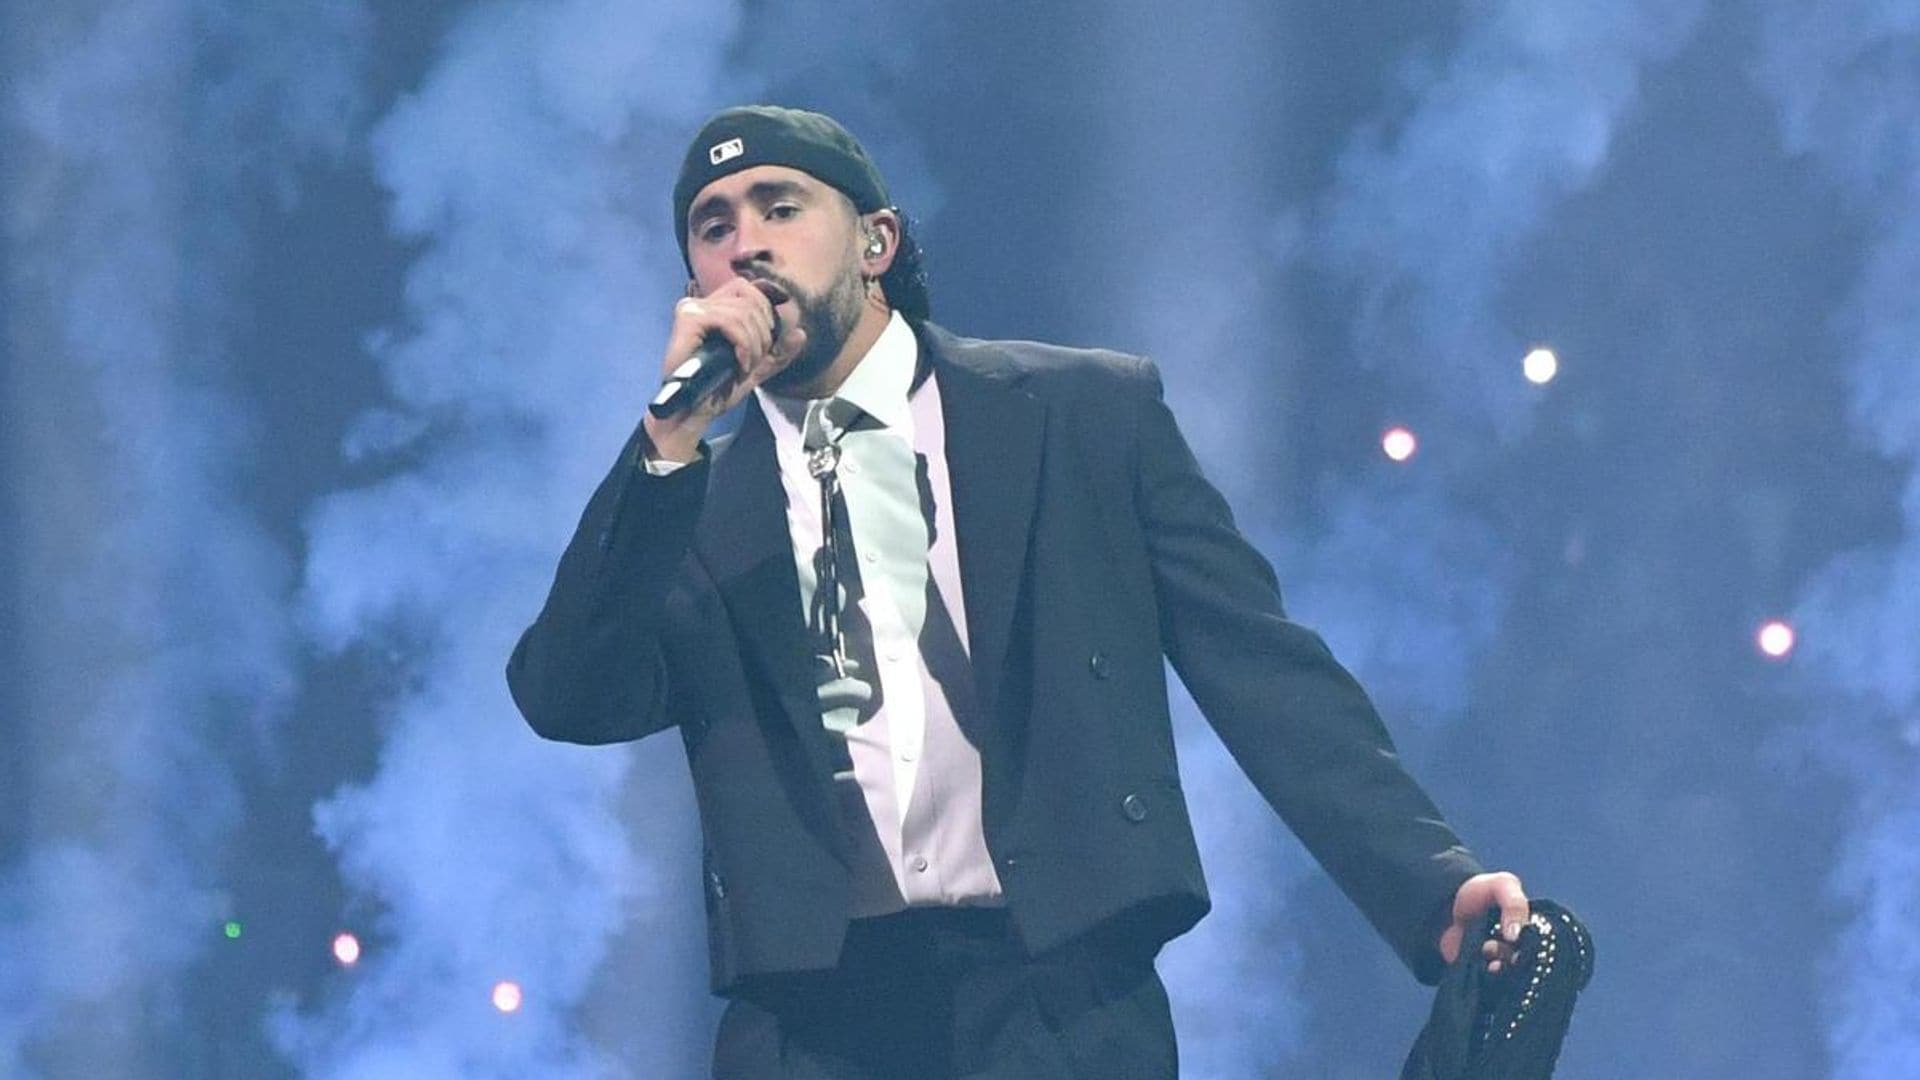 Bad Bunny reunites with classmate Leilany Martínez during his Chicago concert